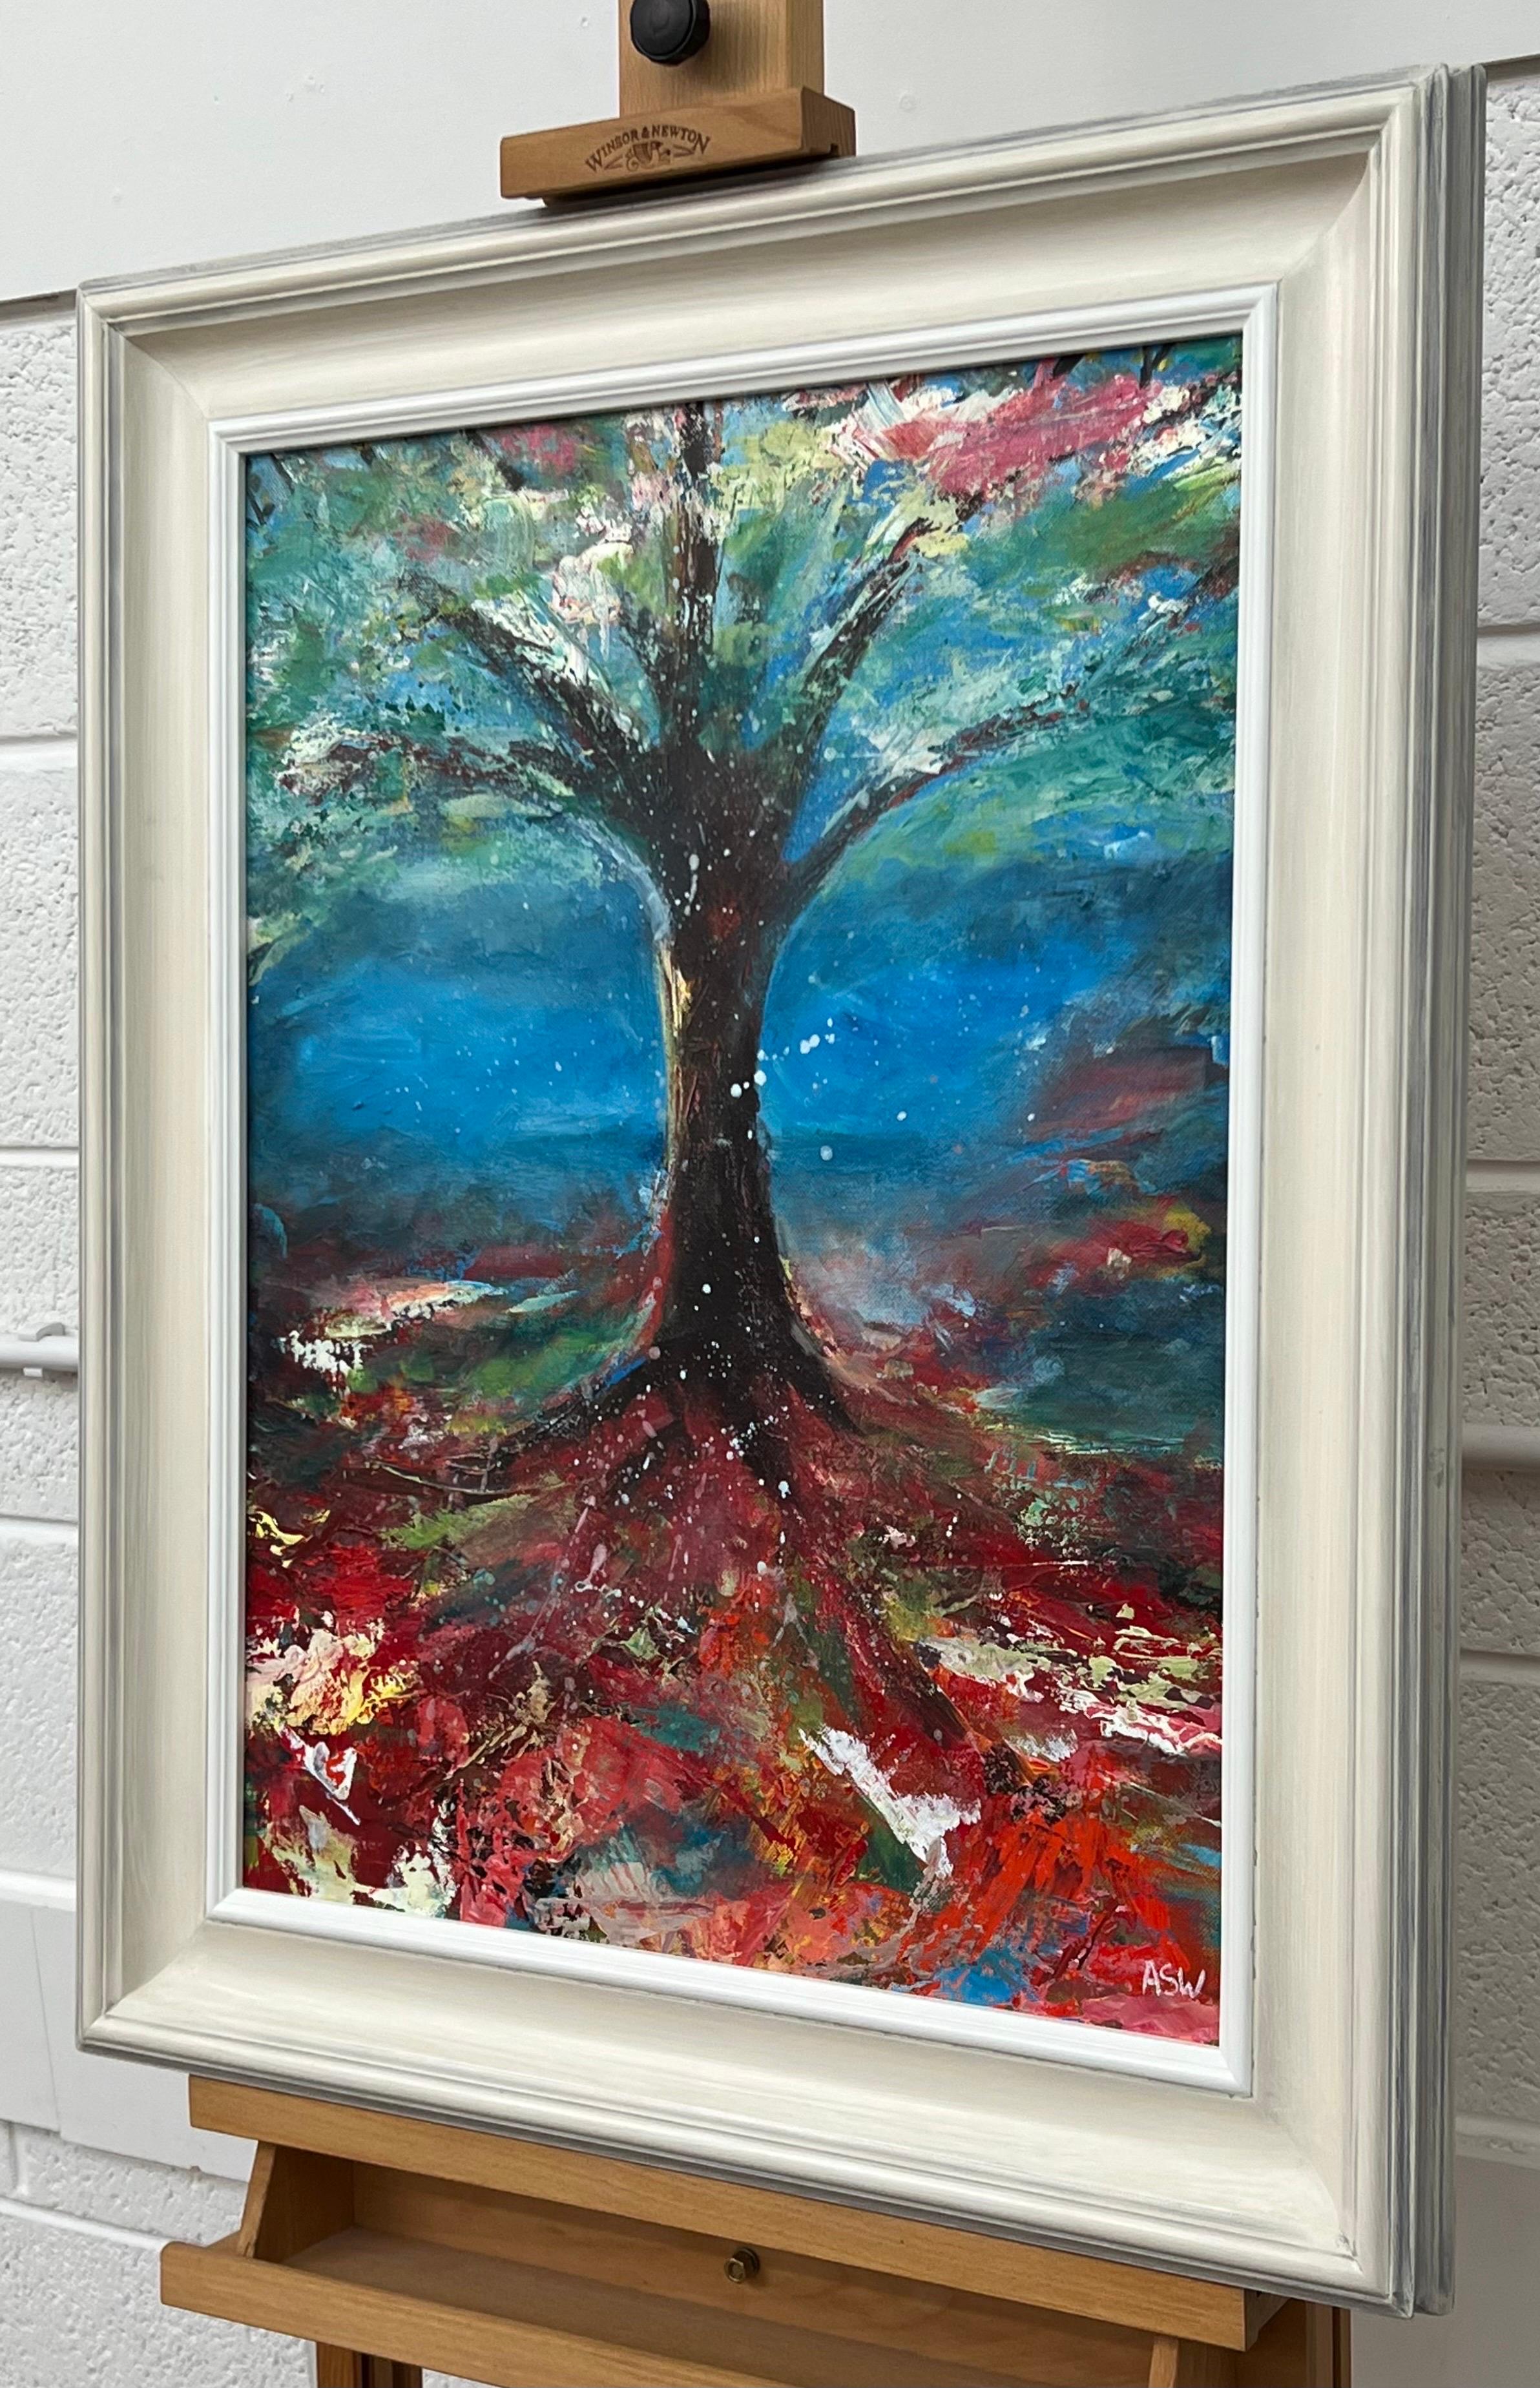 Tree with Red Pink White & Blue Abstract Background by British Landscape Artist - Abstract Impressionist Painting by Angela Wakefield